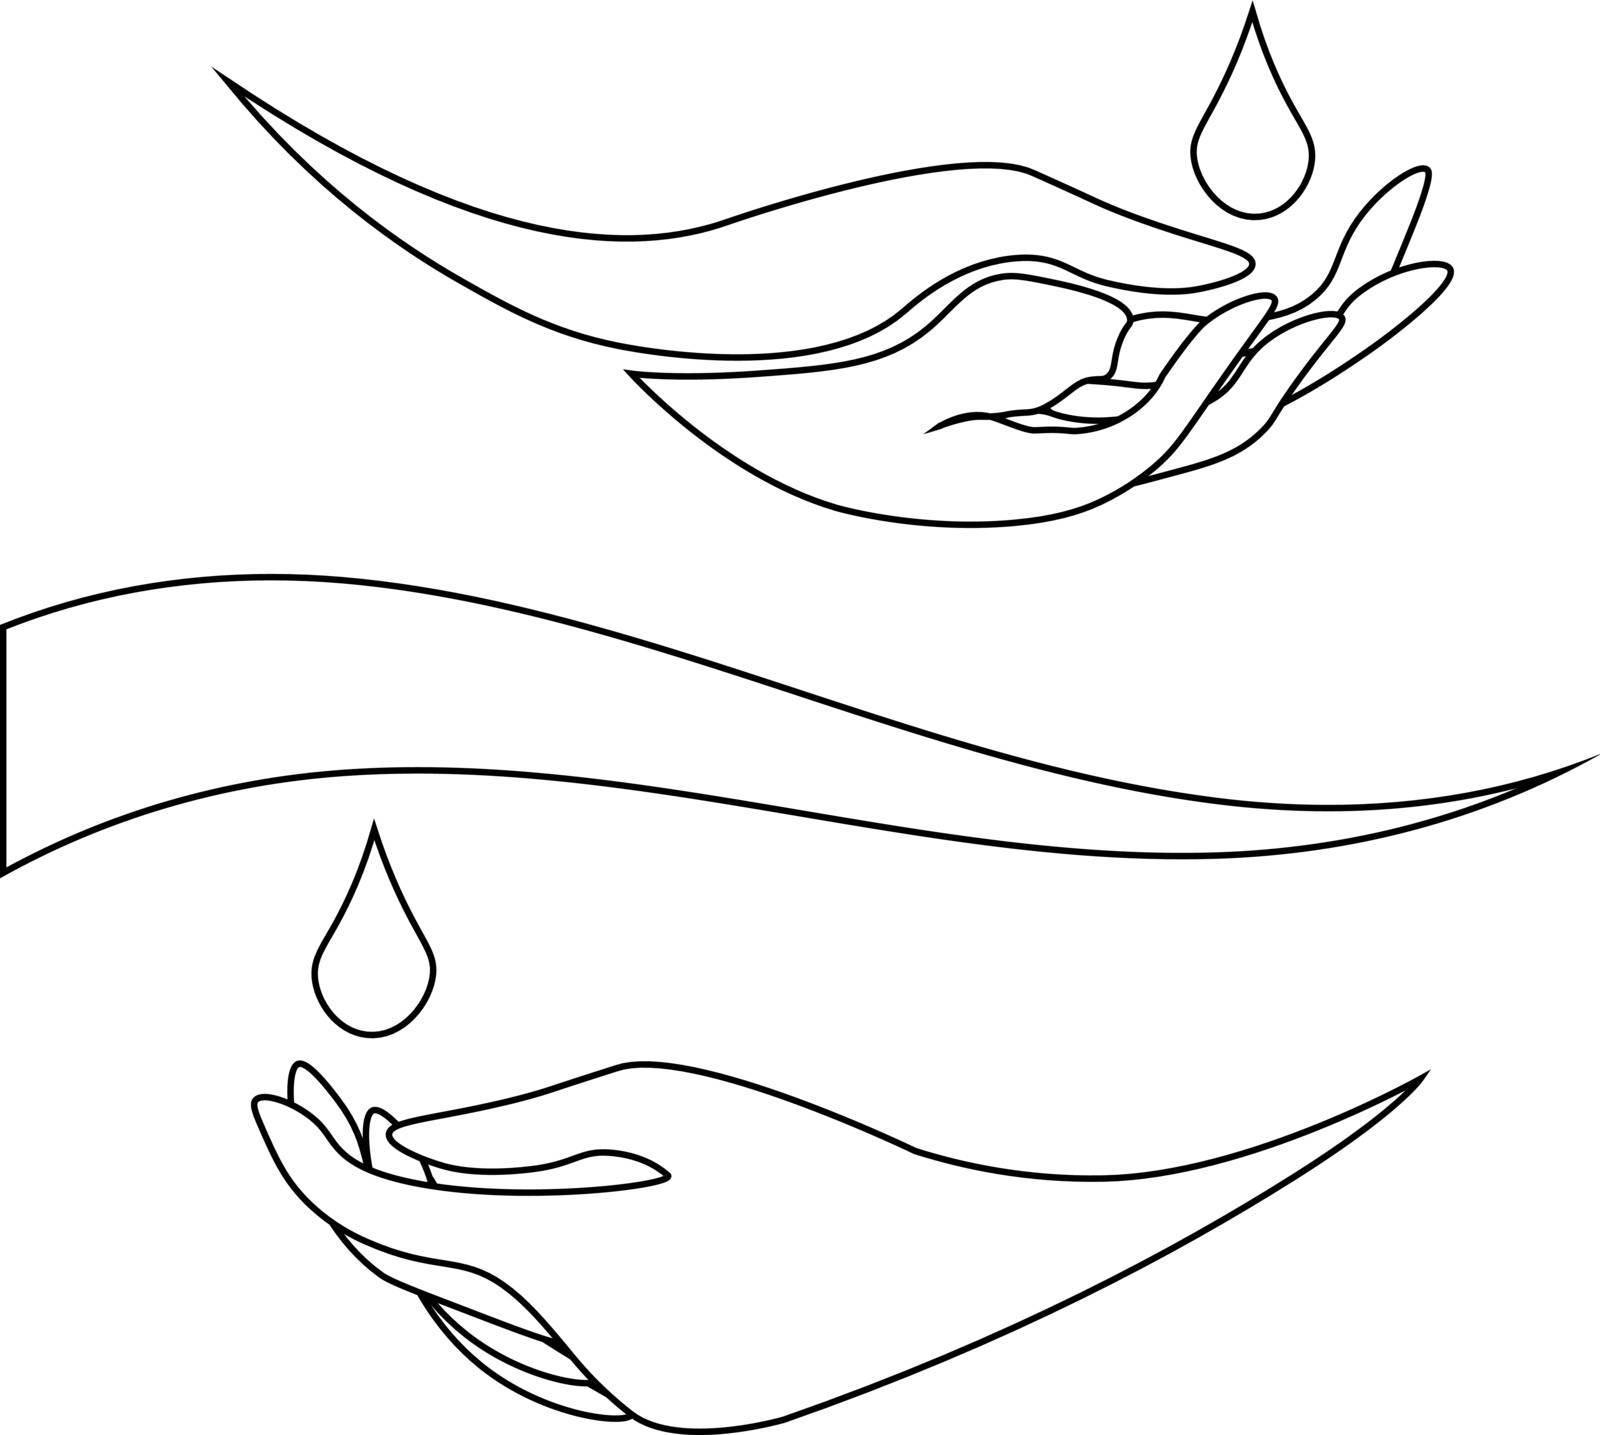 Simple monochrome line art of two hands with water drops